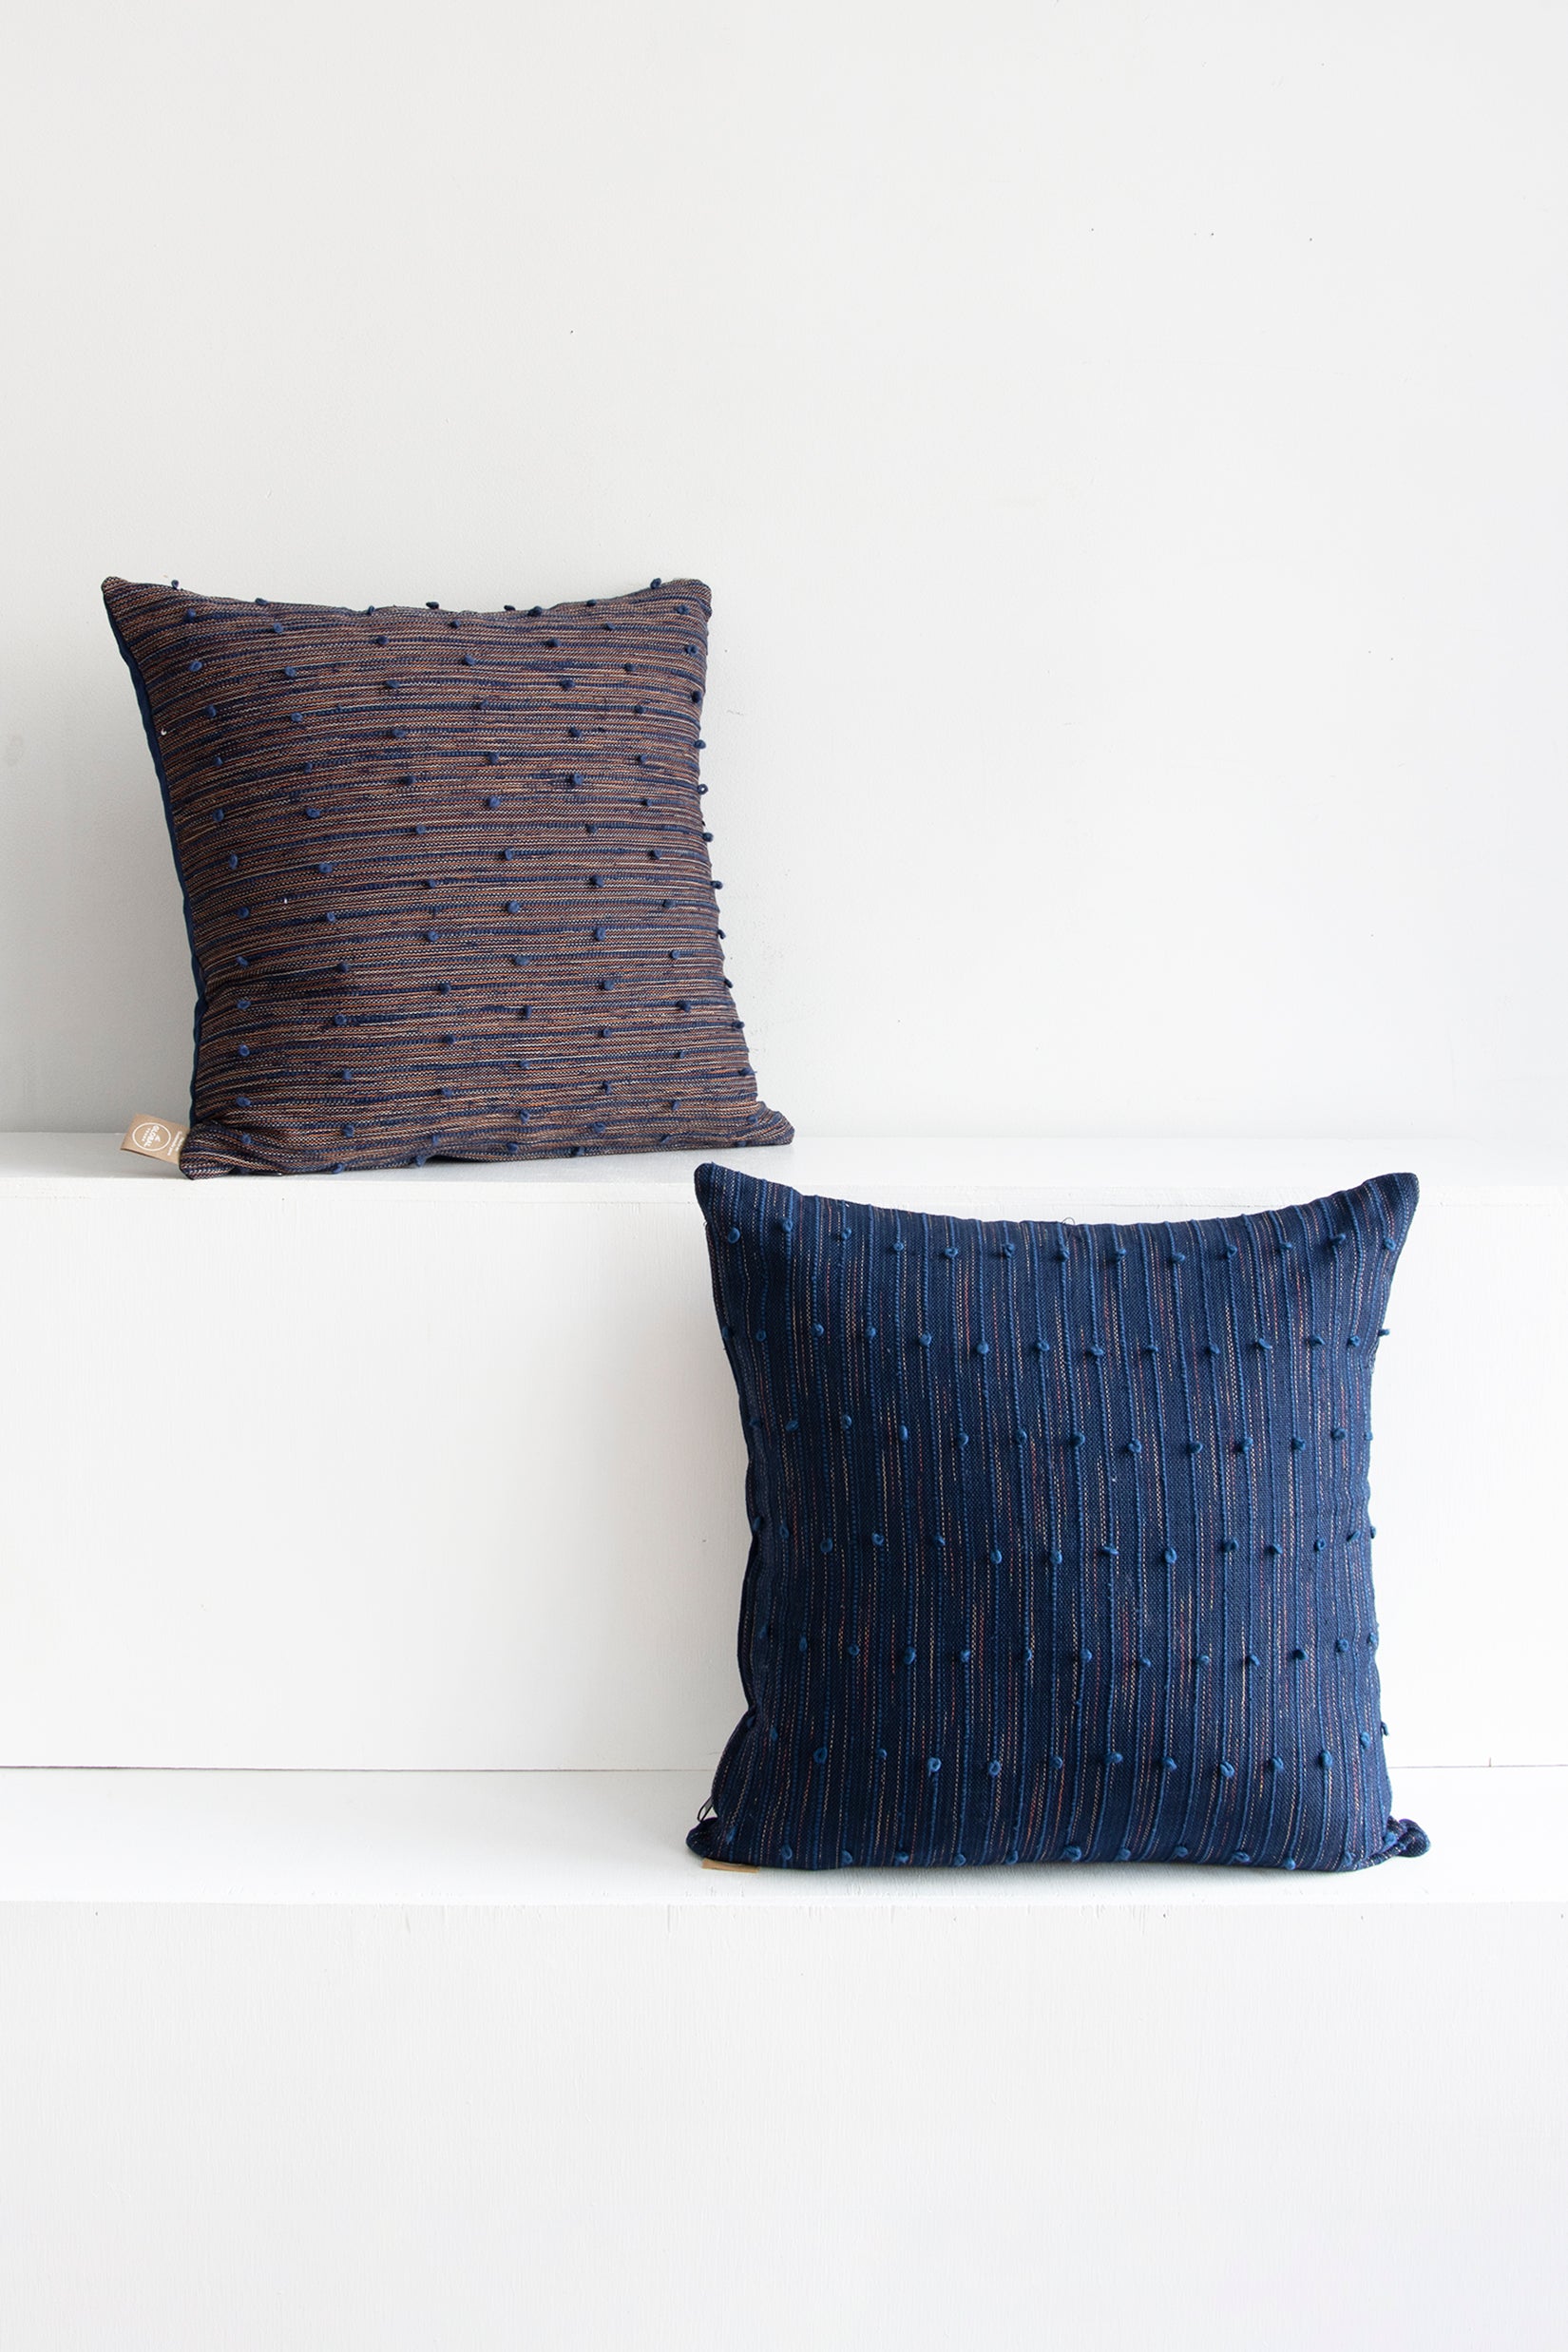 Two complementary pillows, one a mix of coral red and navy and the other navy with beige and coral red accents throughout. Both have raised navy lines running across them, with small navy pom poms arranged along these lines.